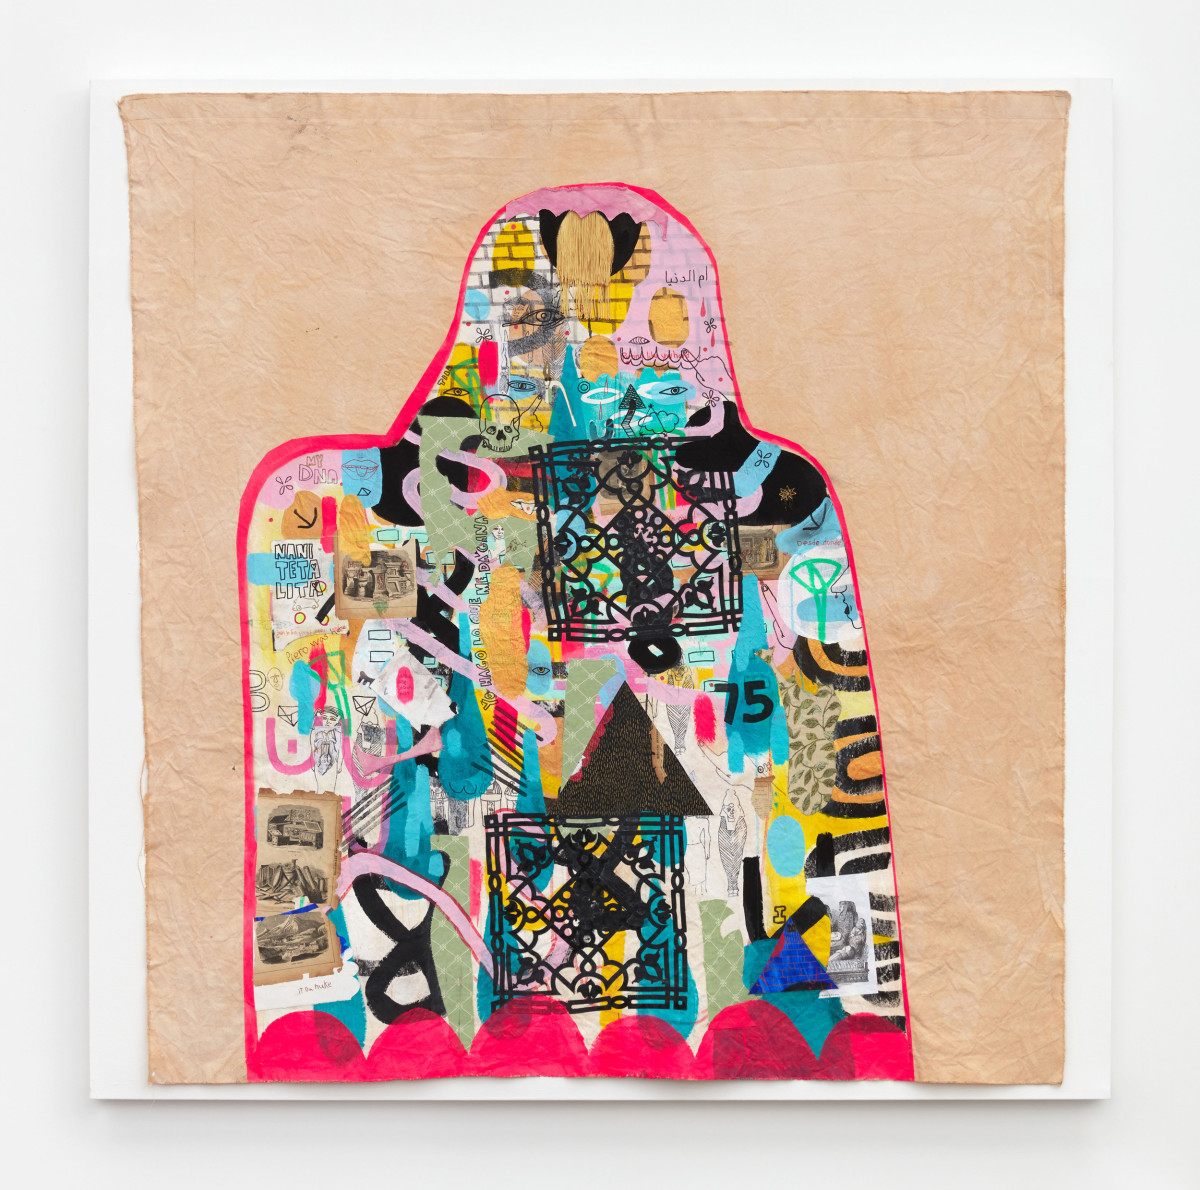 Jackie Milad, Stolen, 2021, Mixed media on hand dyed canvas collage, 72 x 72 in.